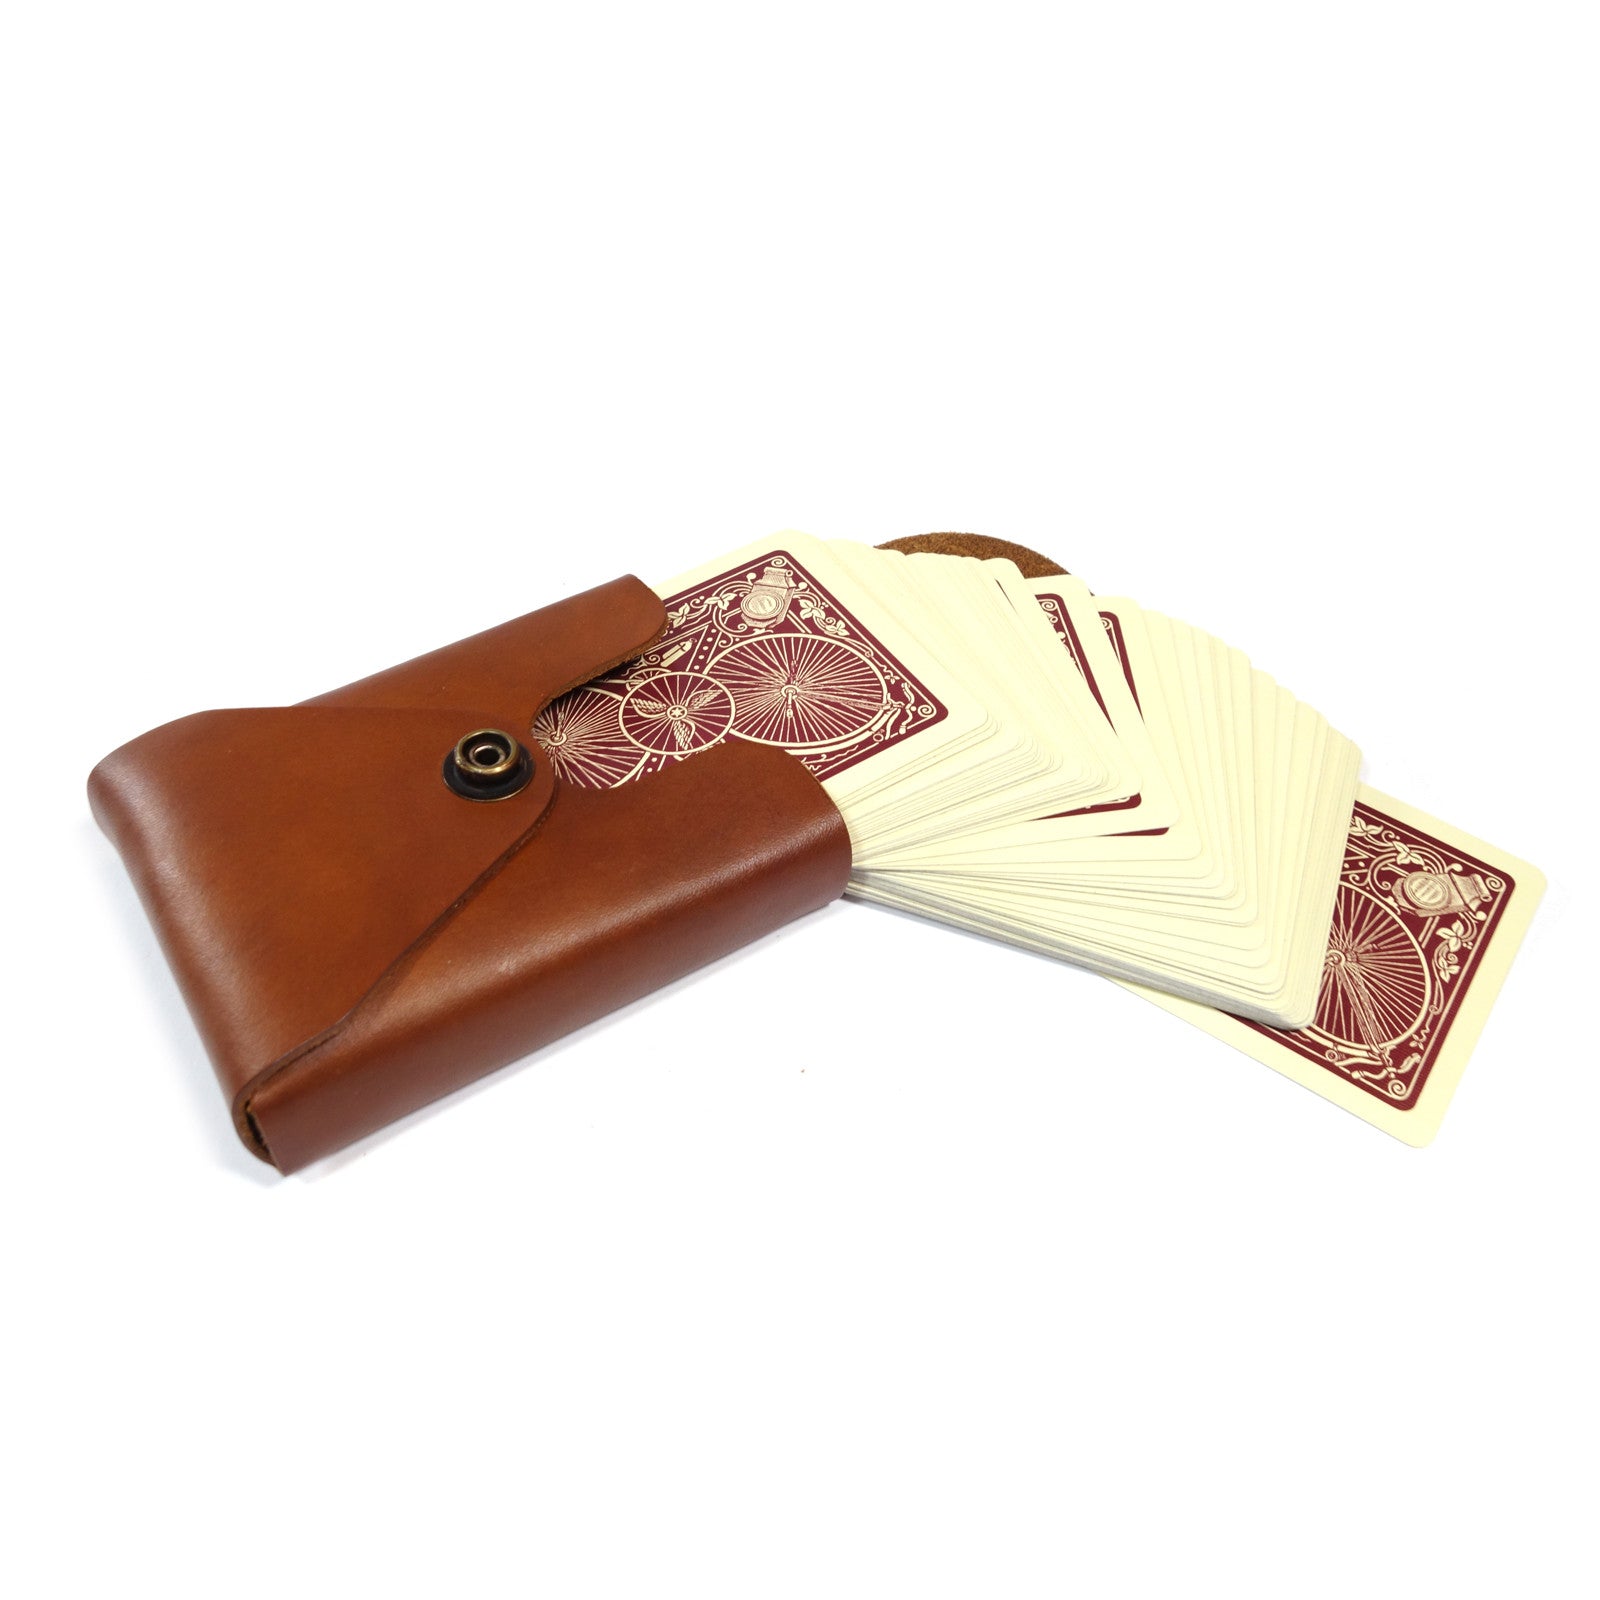 Leather Card Case, playing cards, bicycle cards, poker, card games, handmade, made in usa, handcrafted, leather case, card case